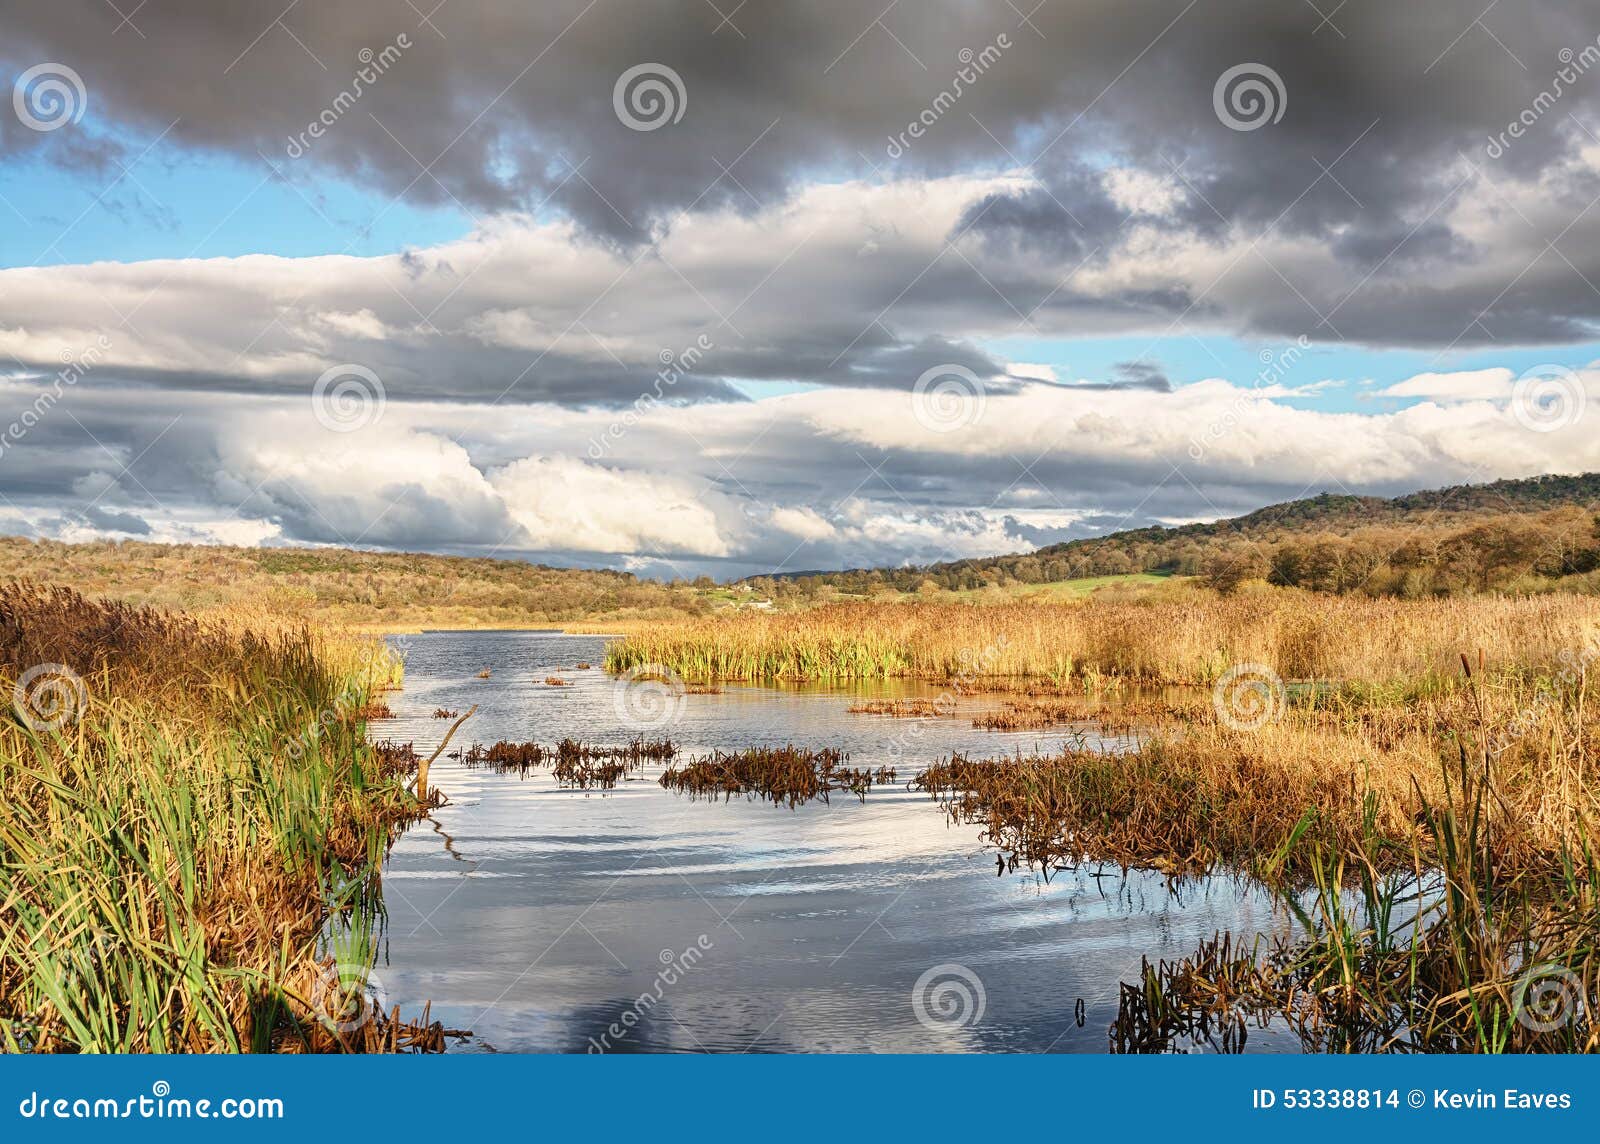 reeds and water at leighton moss, lancashire